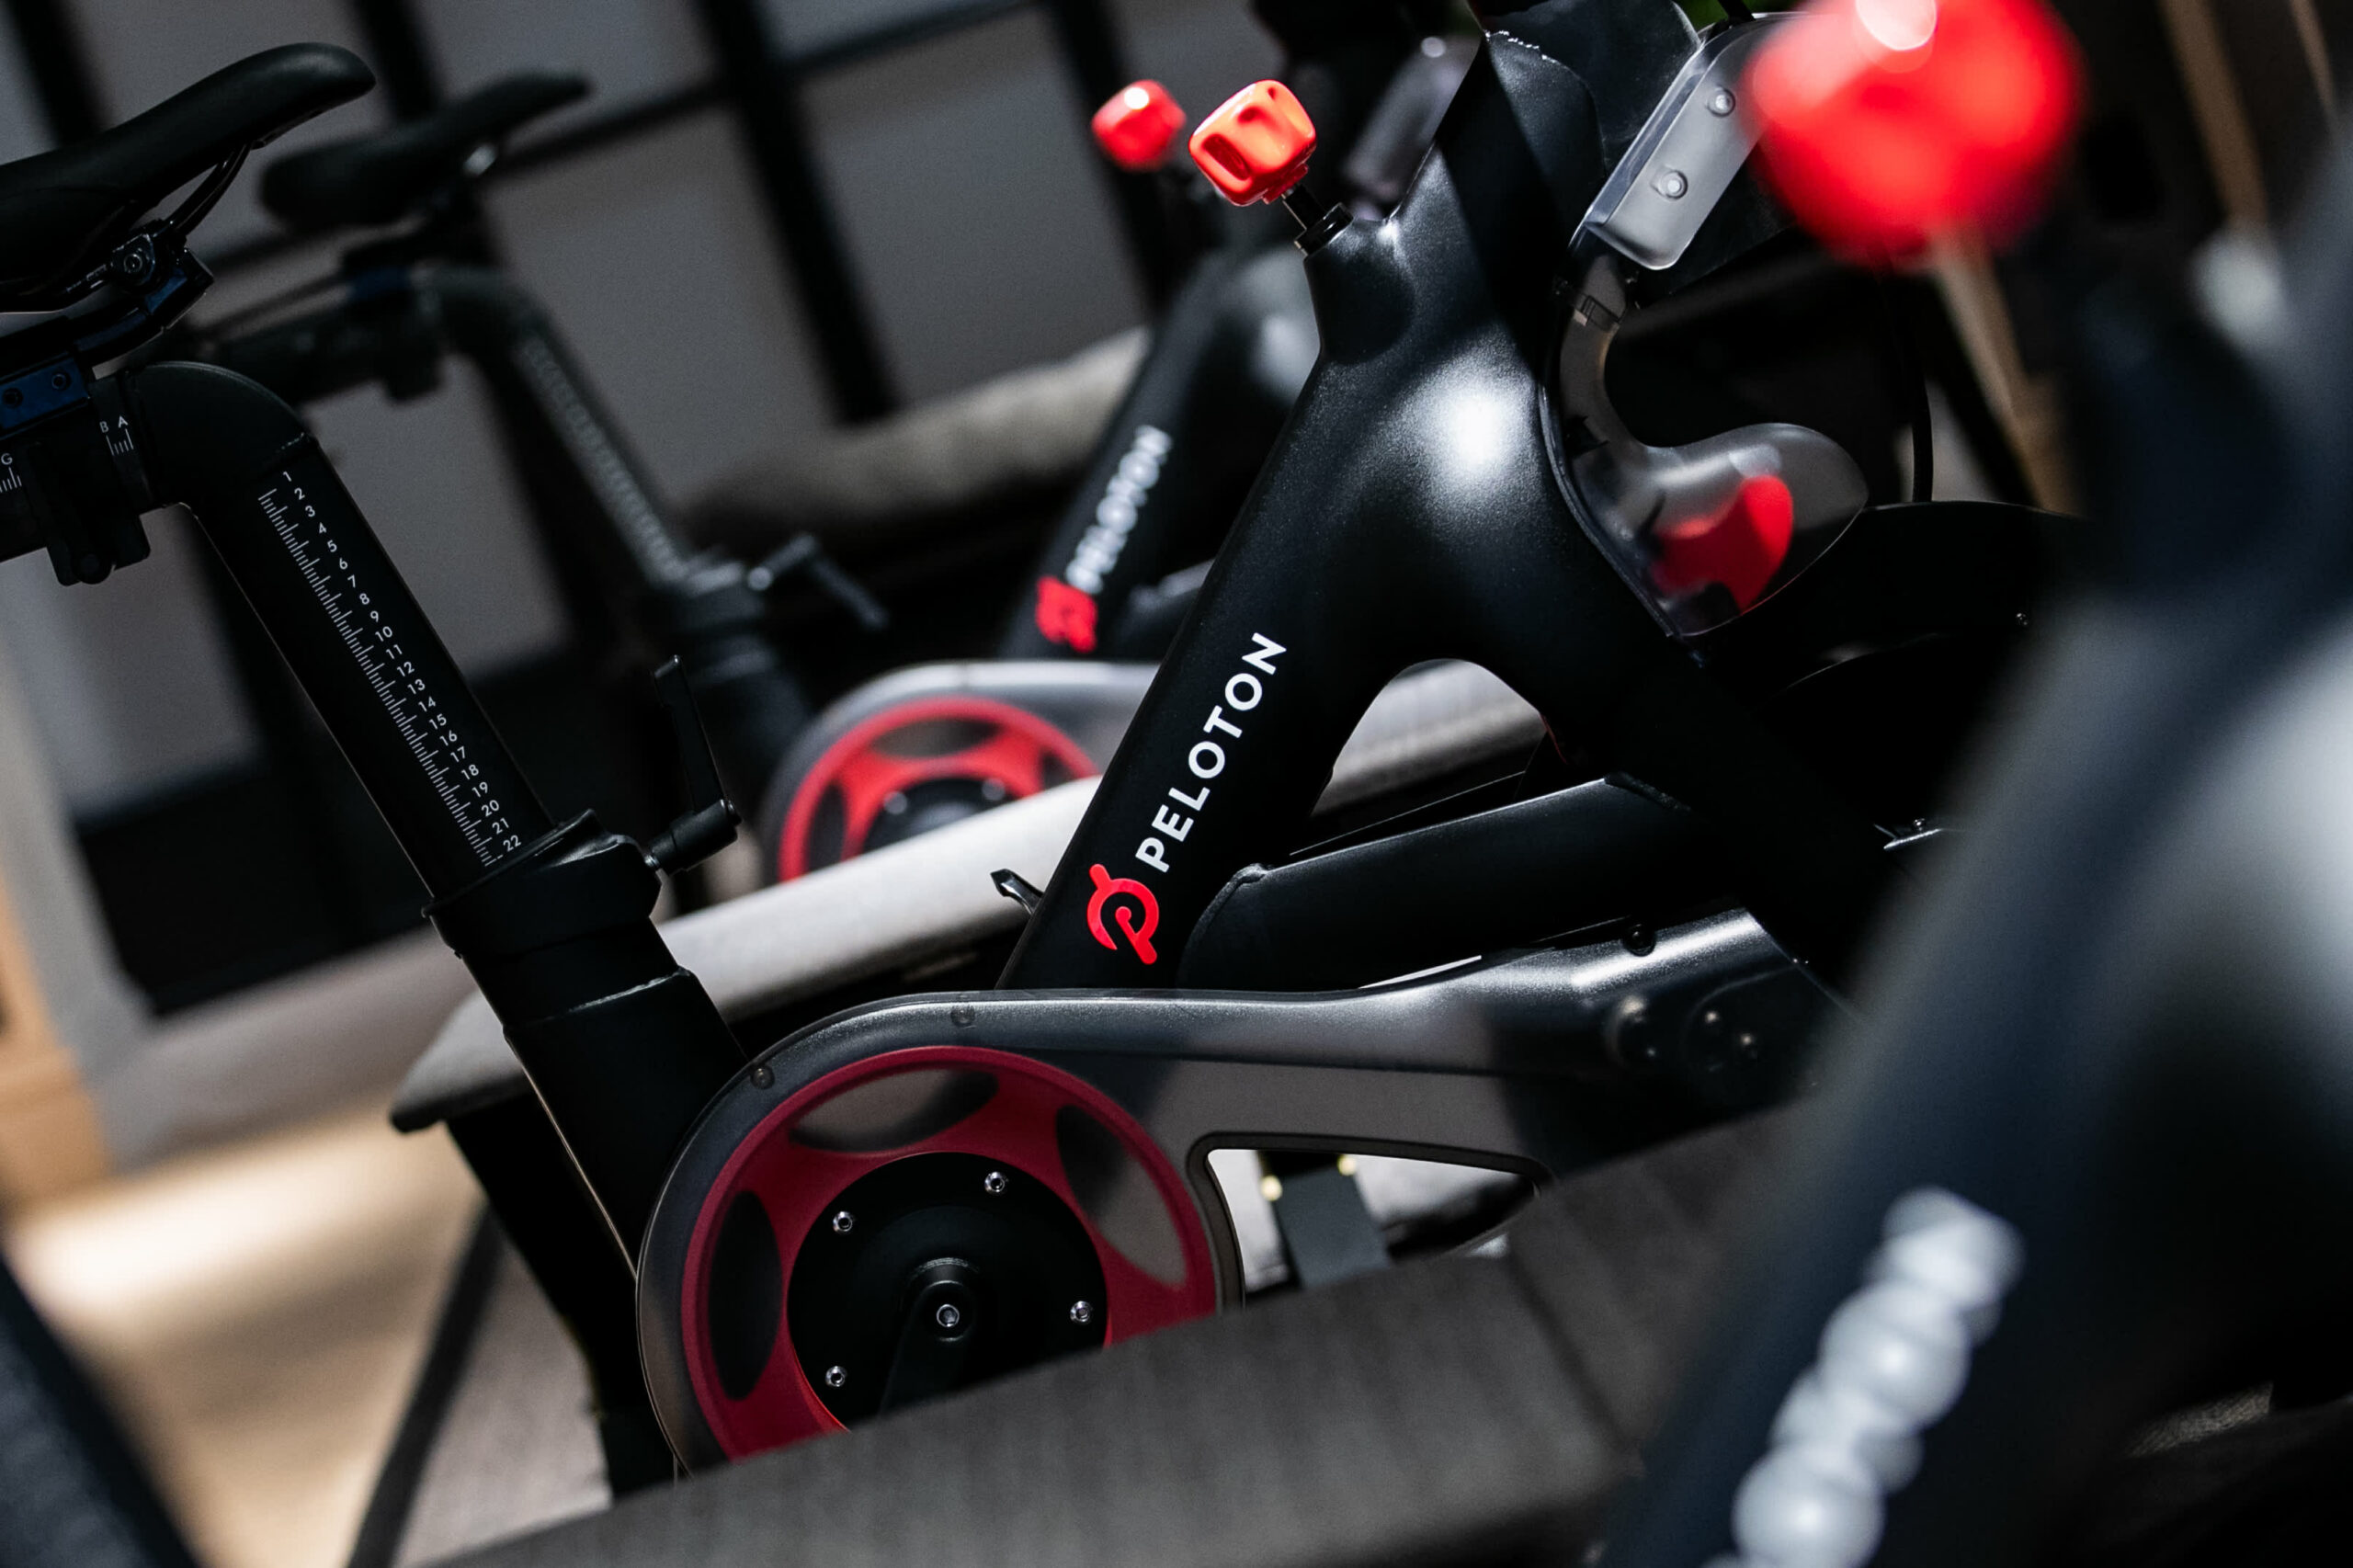 Peloton is about to tack on hundreds of dollars in fees to its Bike and treadmill, citing inflation